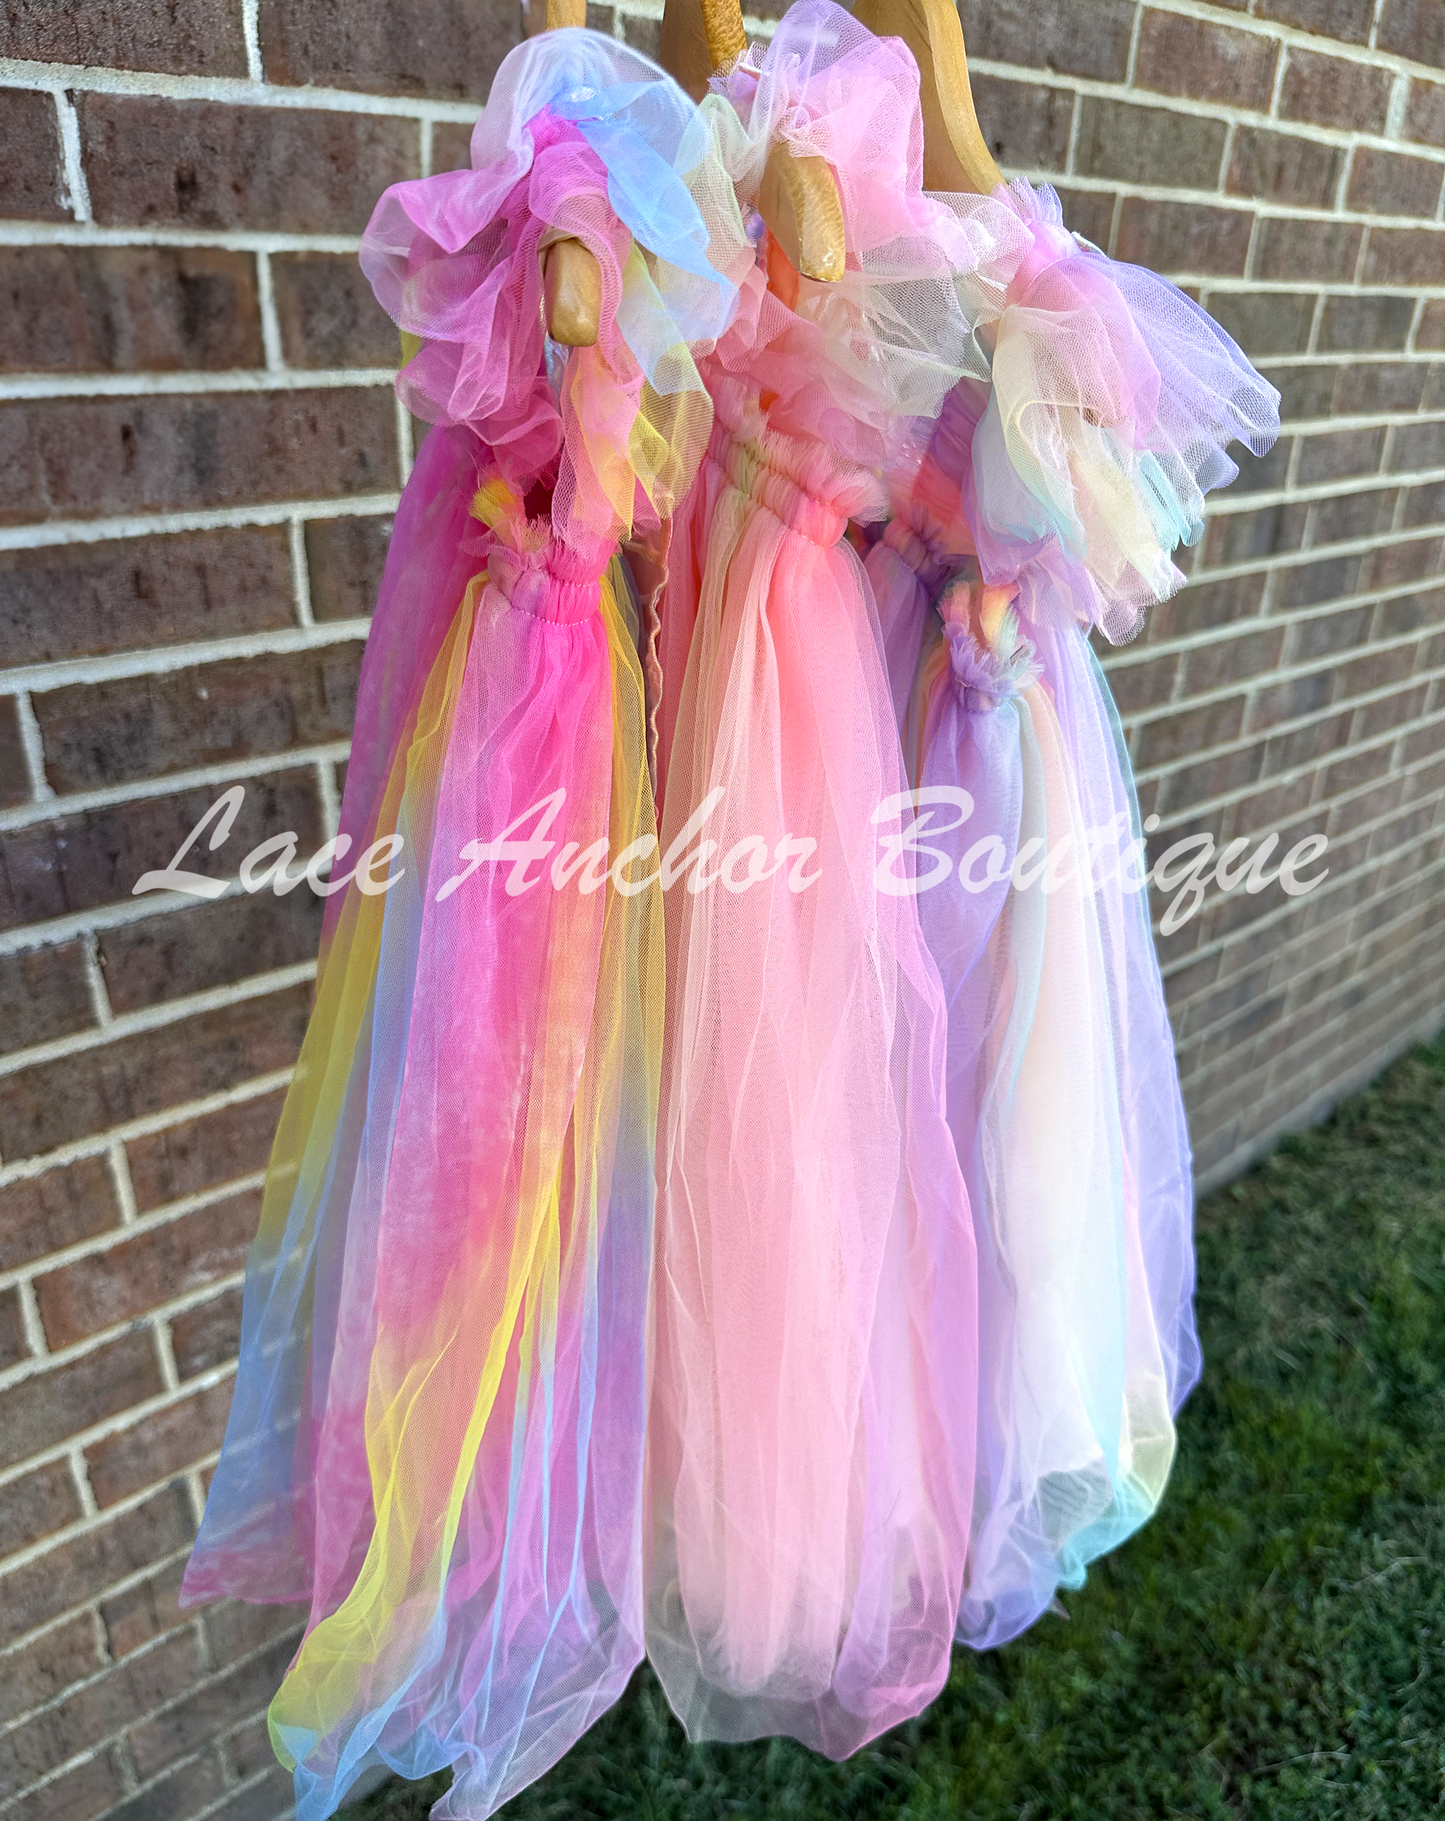 Rainbow fairy peach, lilac purple, light coral, pale yellow, white, teal blue, neon pink, neon yellow knee length tulle dresses with iridescent butterfly wings attached for toddlers, babies, kids. Dress for girls.